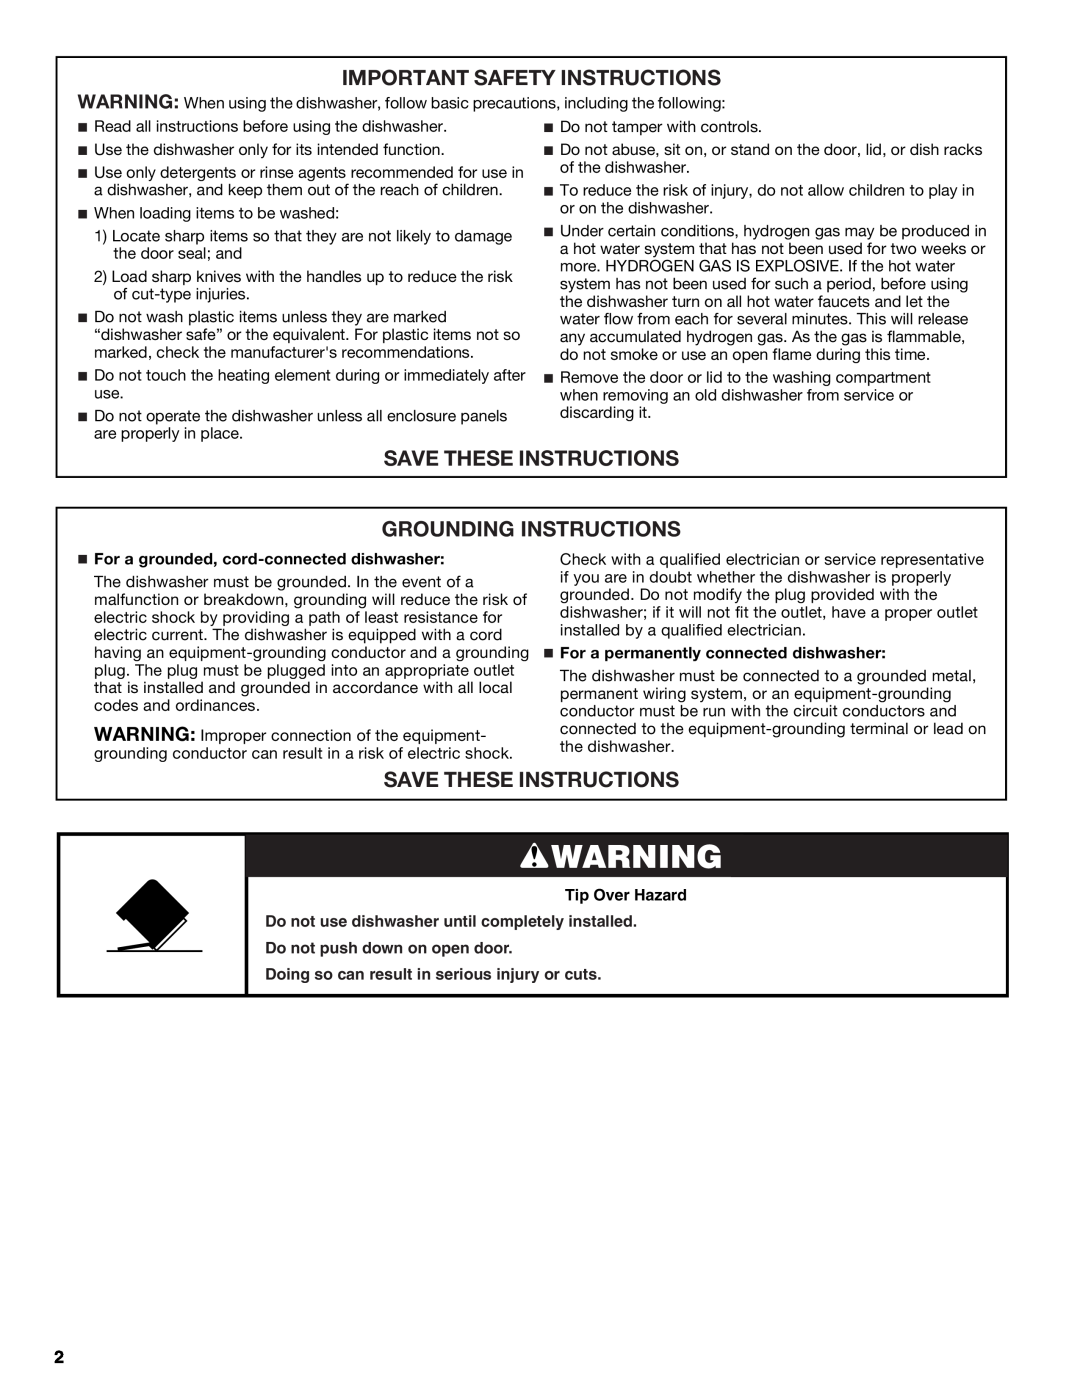 Jenn-Air W10300216A warranty Important Safety Instructions, Save These Instructions Grounding Instructions, Tip Over Hazard 